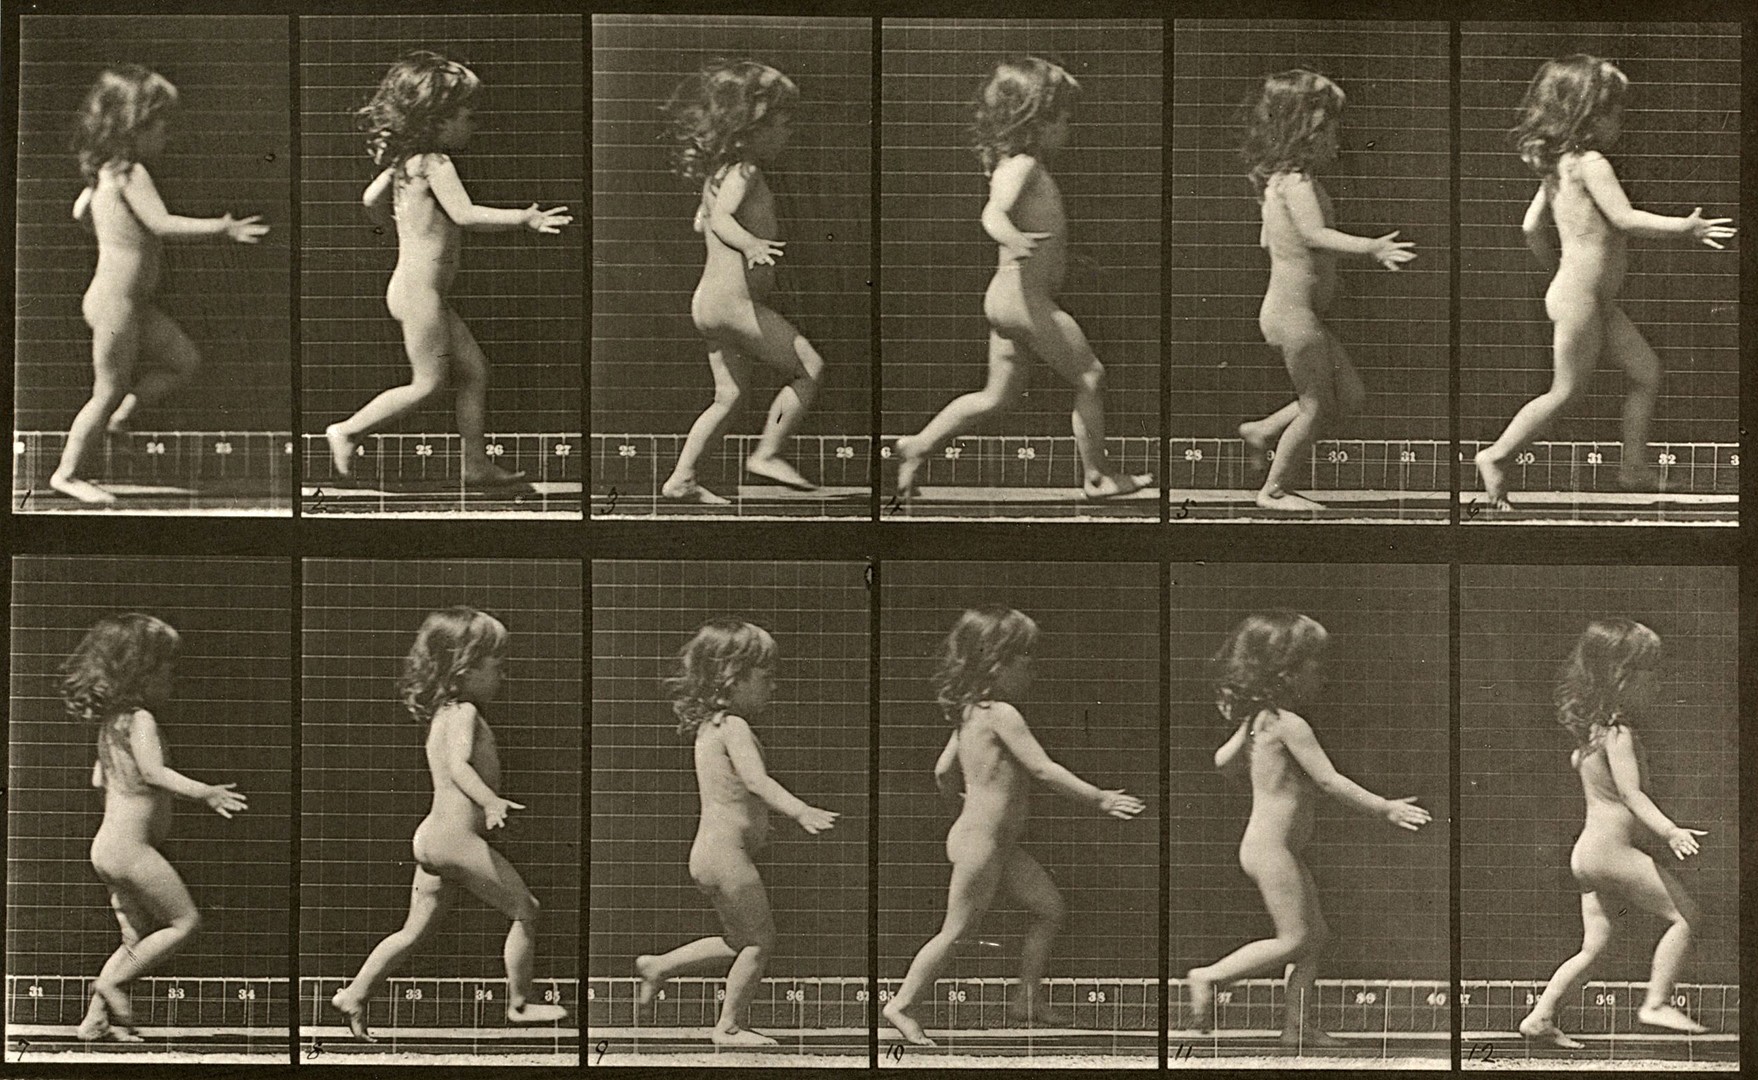 Sequence of black and white photos showing the movements of a running child